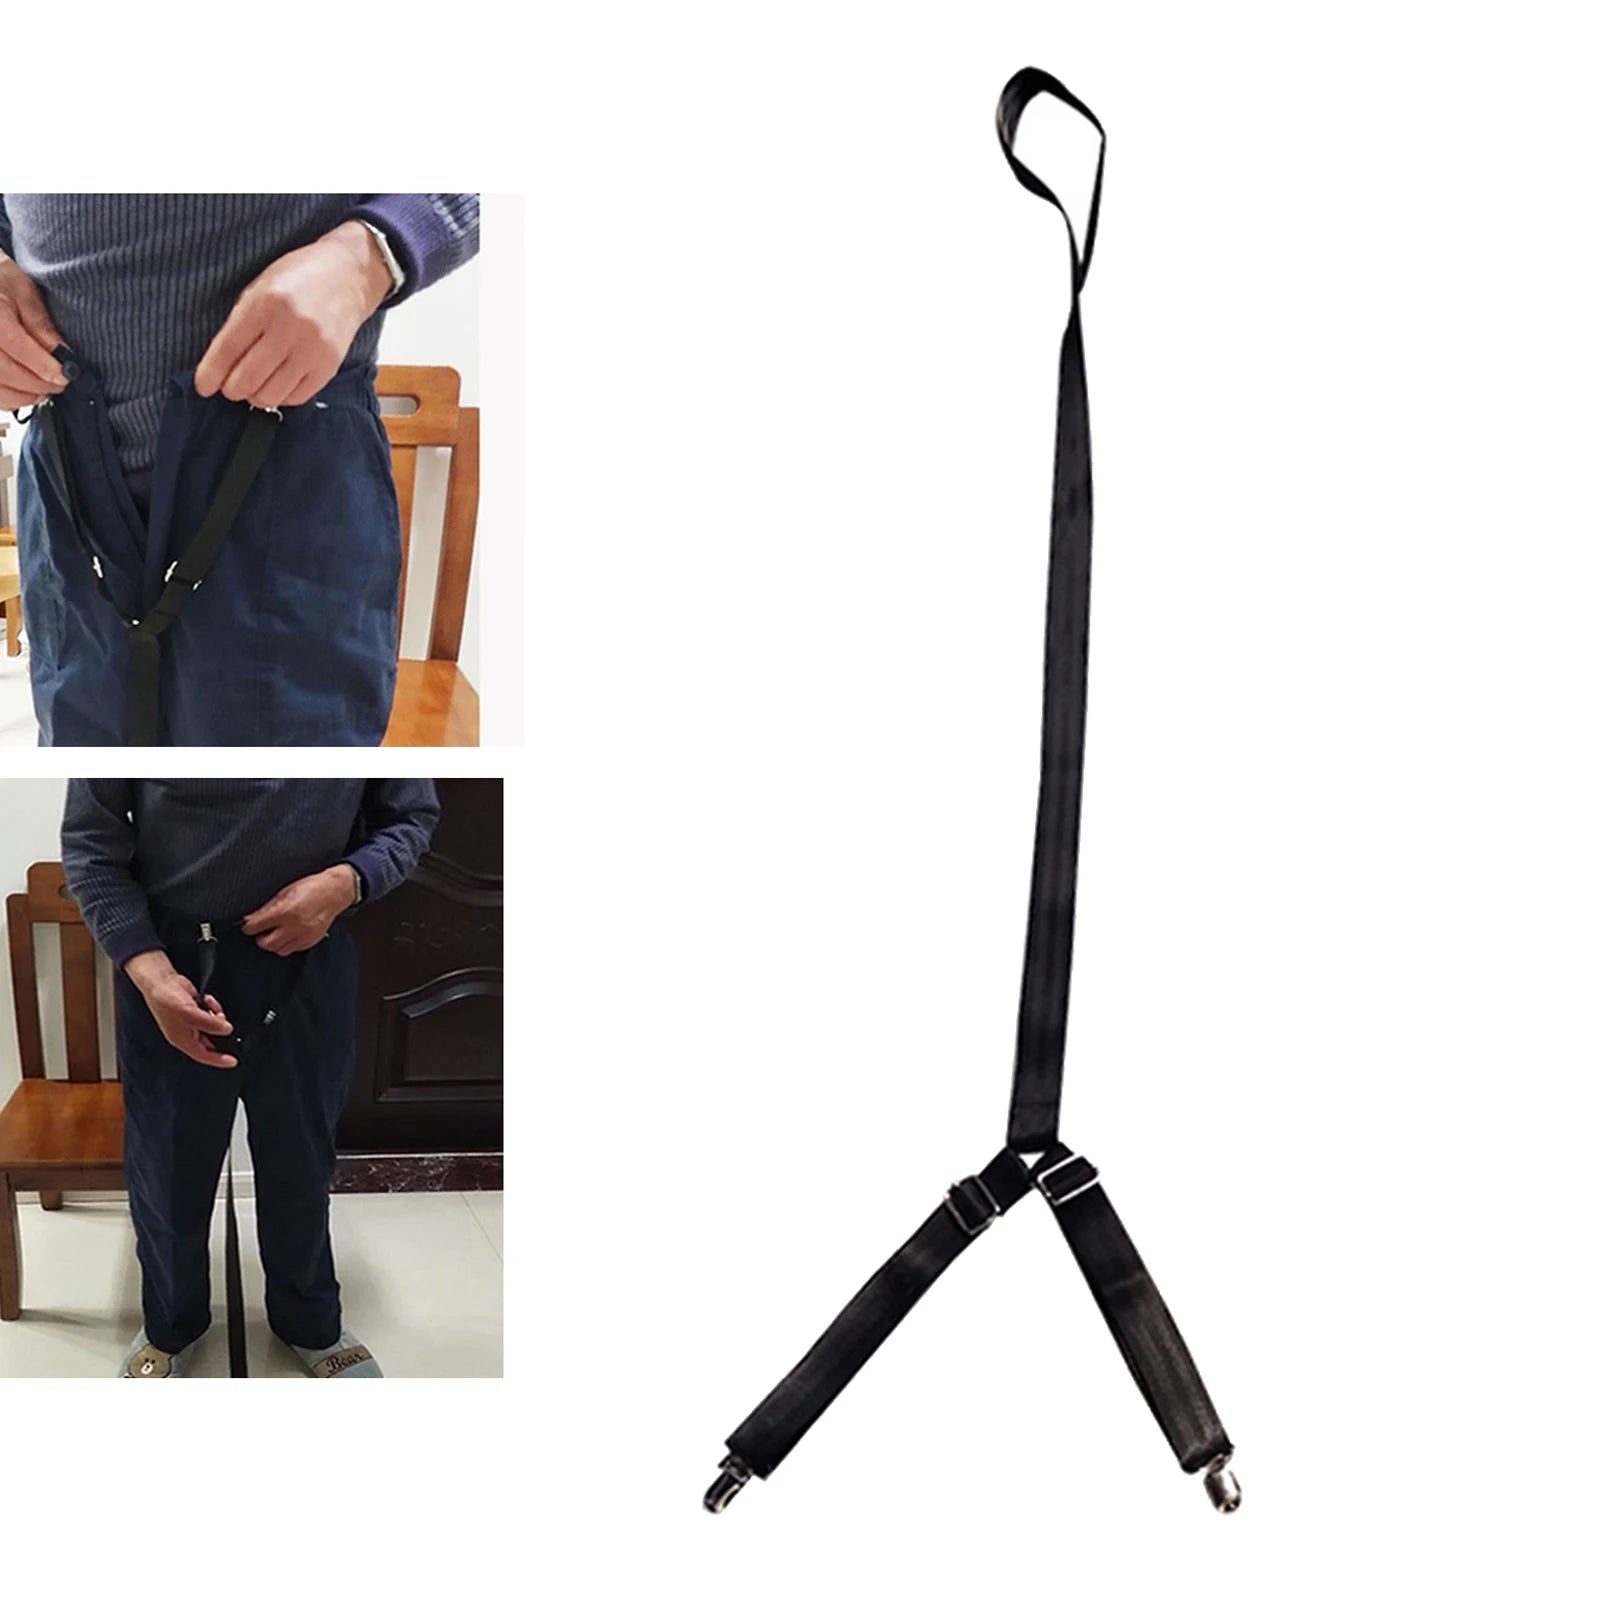 Clip and Pull Dressing Aid Strap - Adjustable Pants Assist for Elderly and Handicap